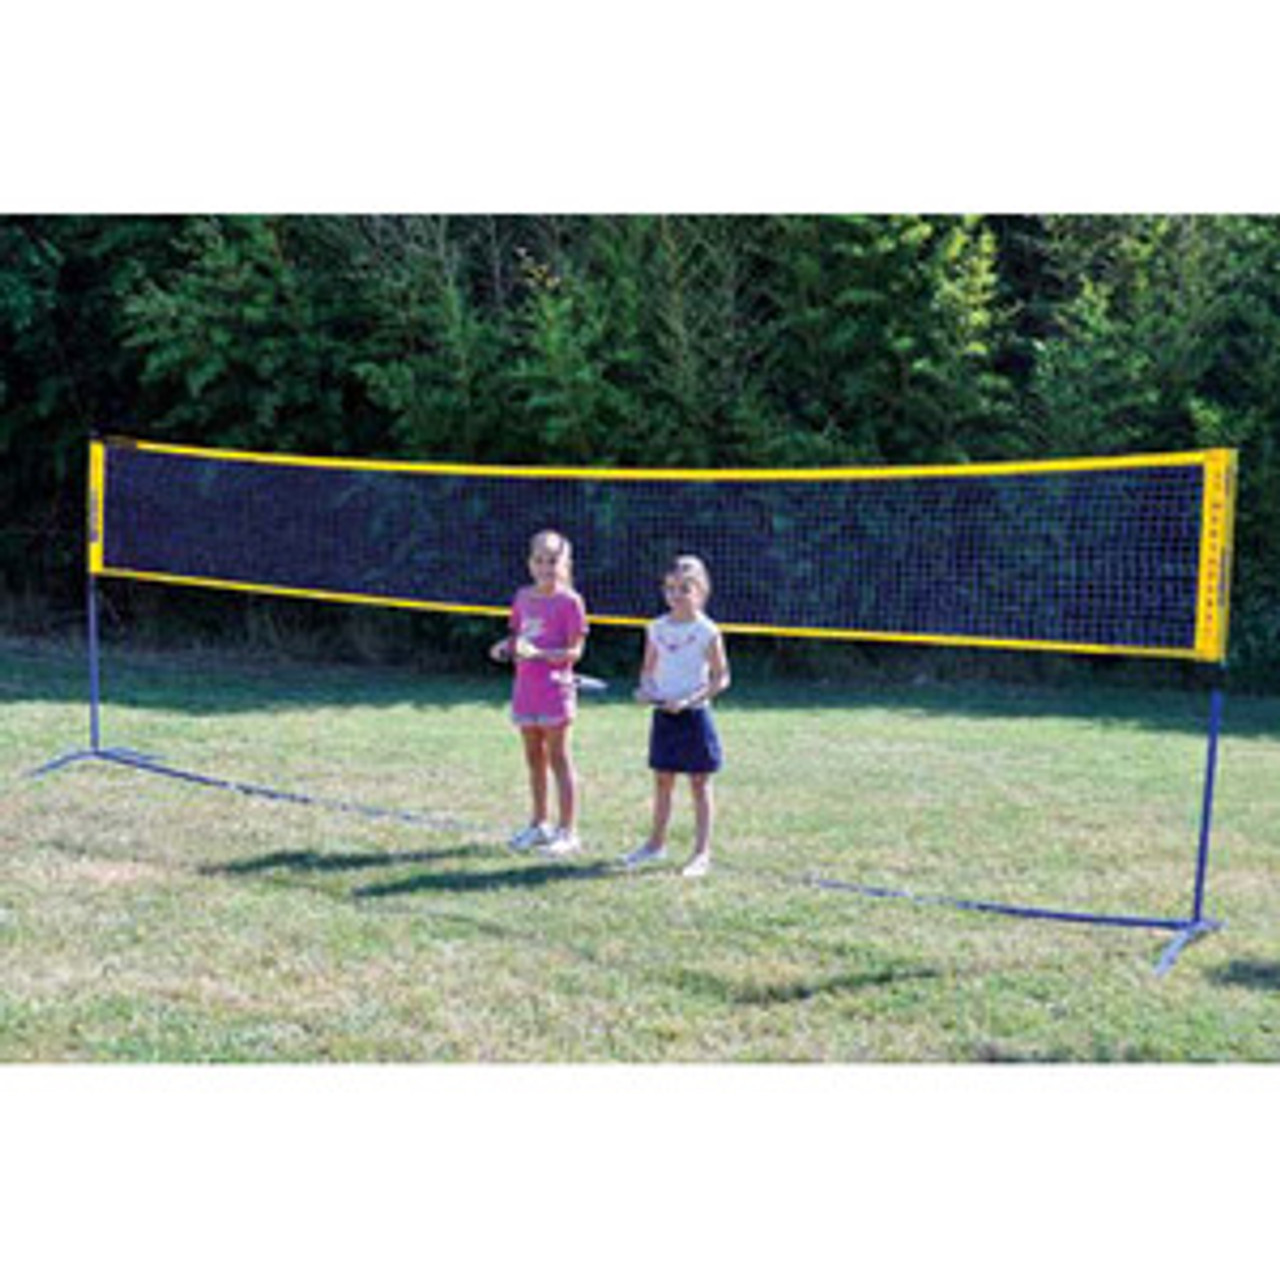 OnCourt OffCourt's MultiNet-The newest of their patented portable nets includes shipping